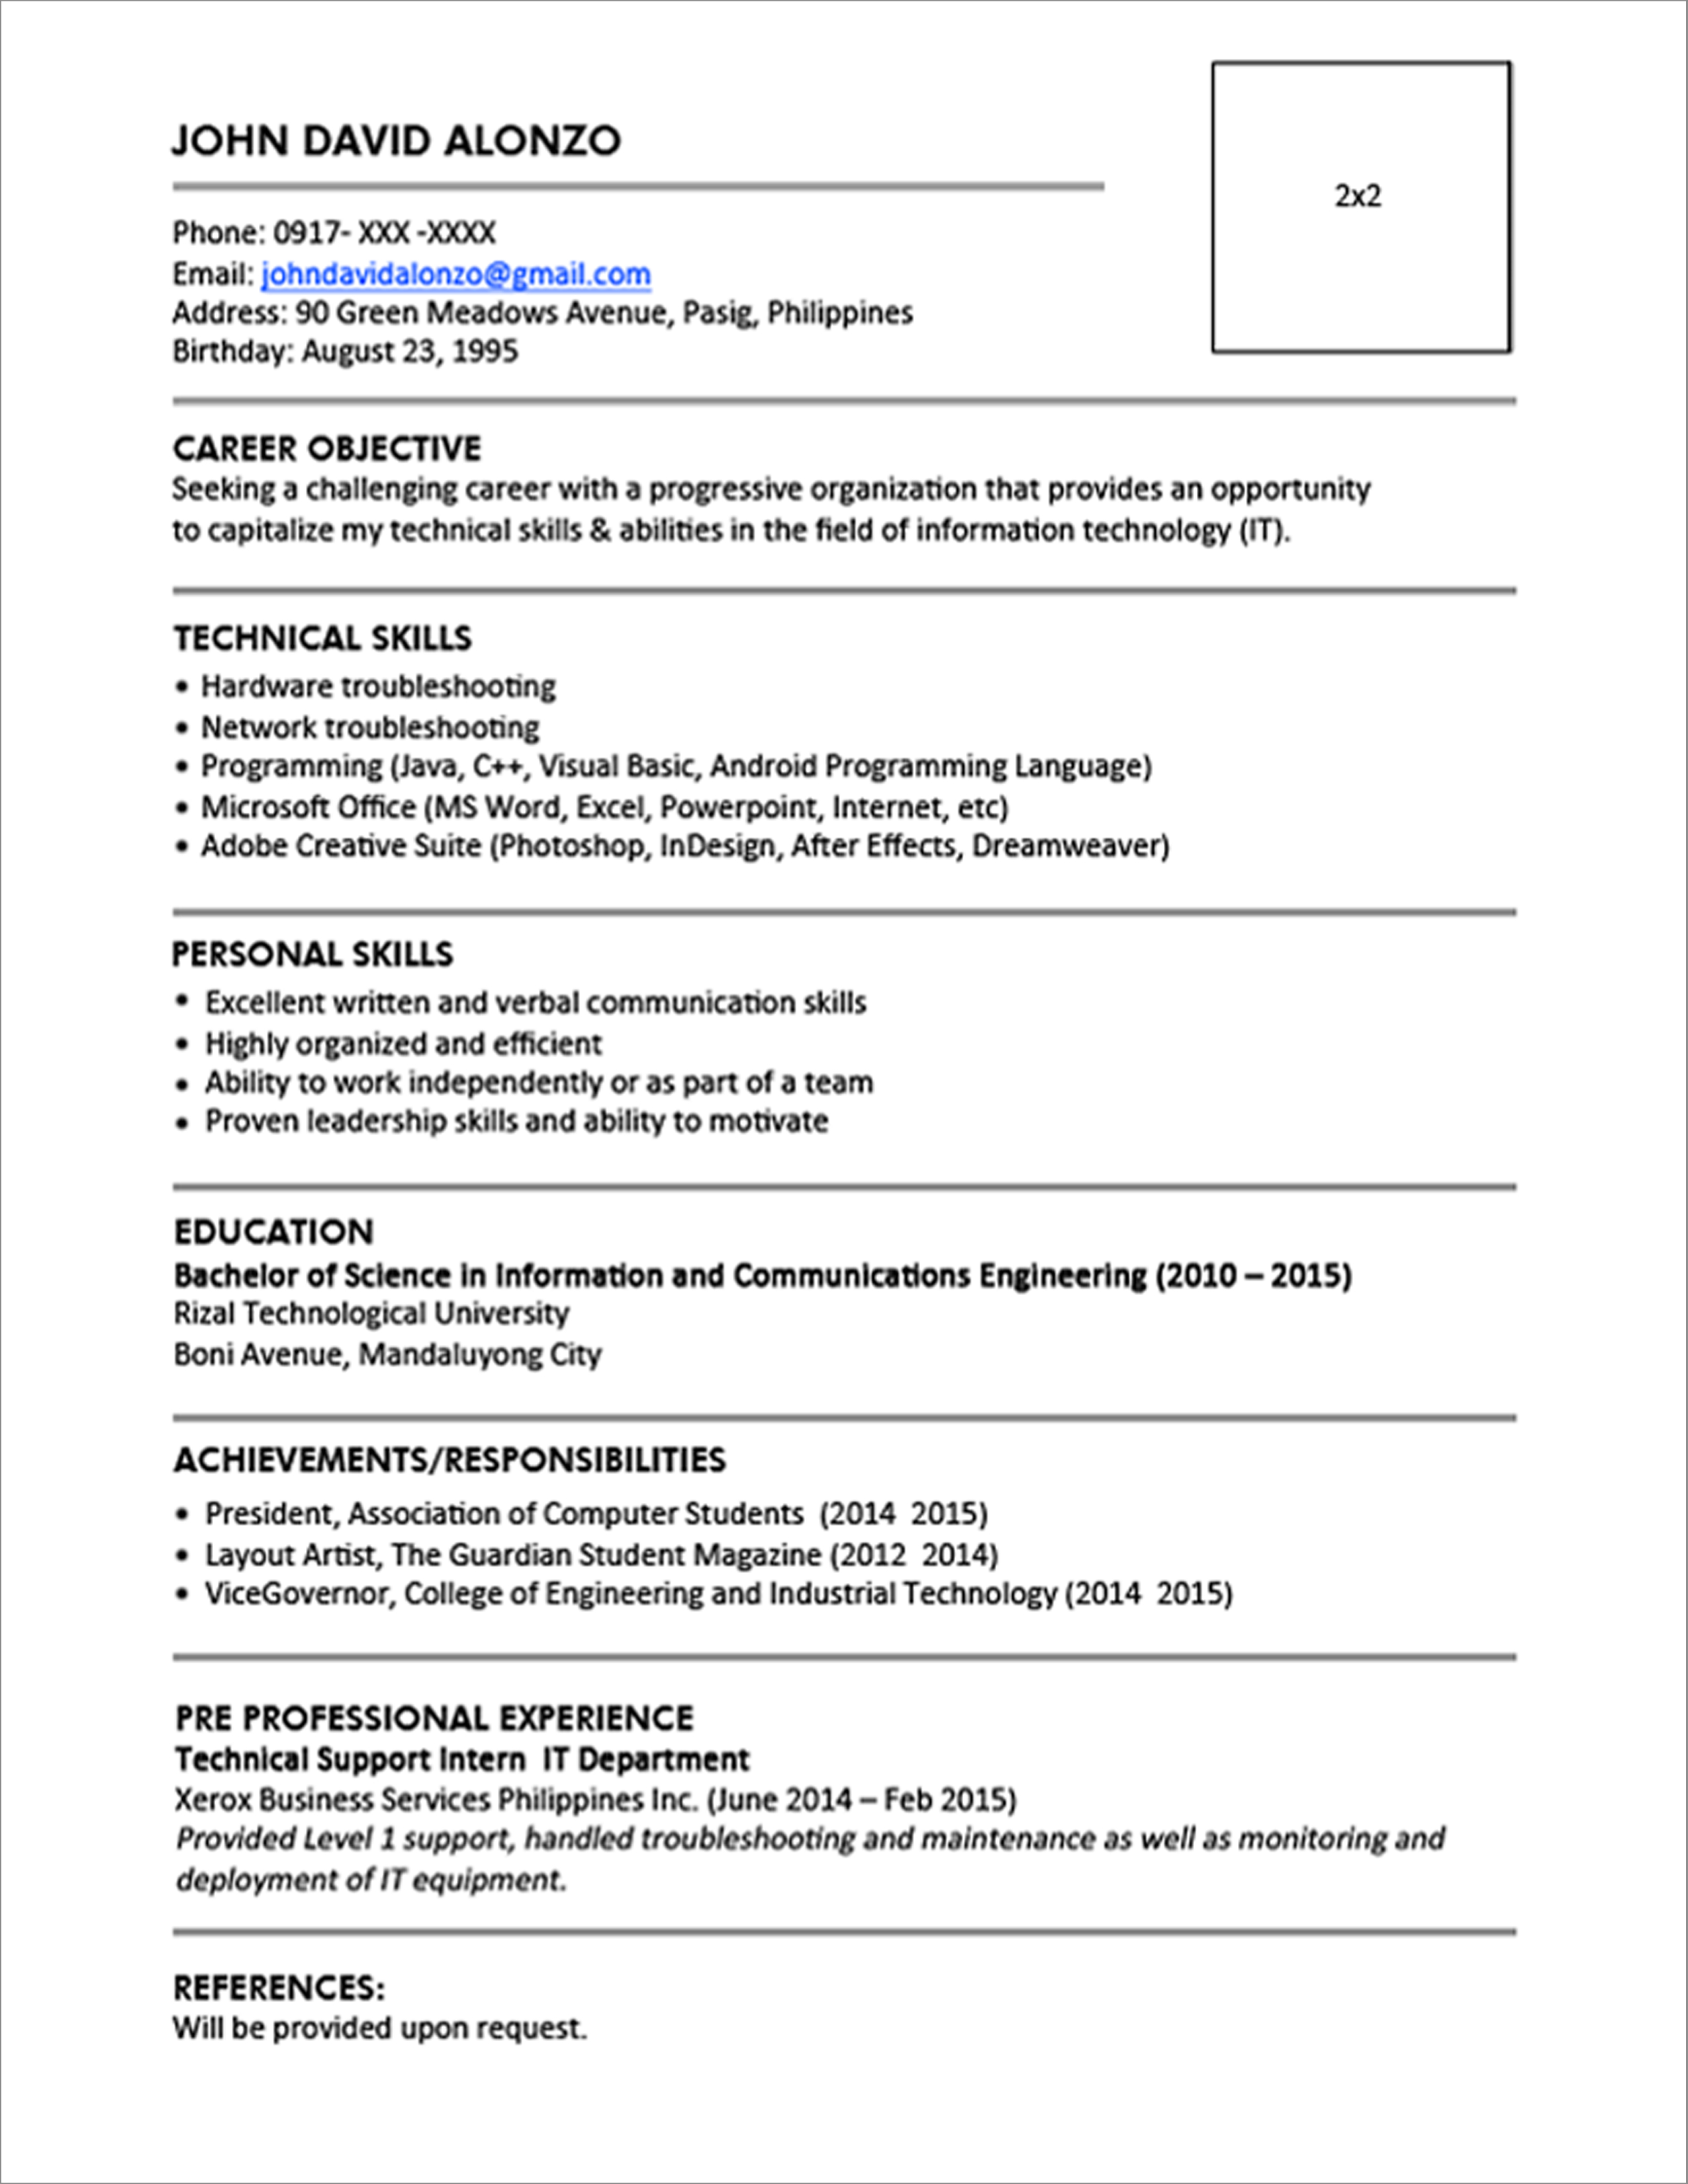 Resume Tips Templates Resume Templates You Can Download Jobstreet Philippines